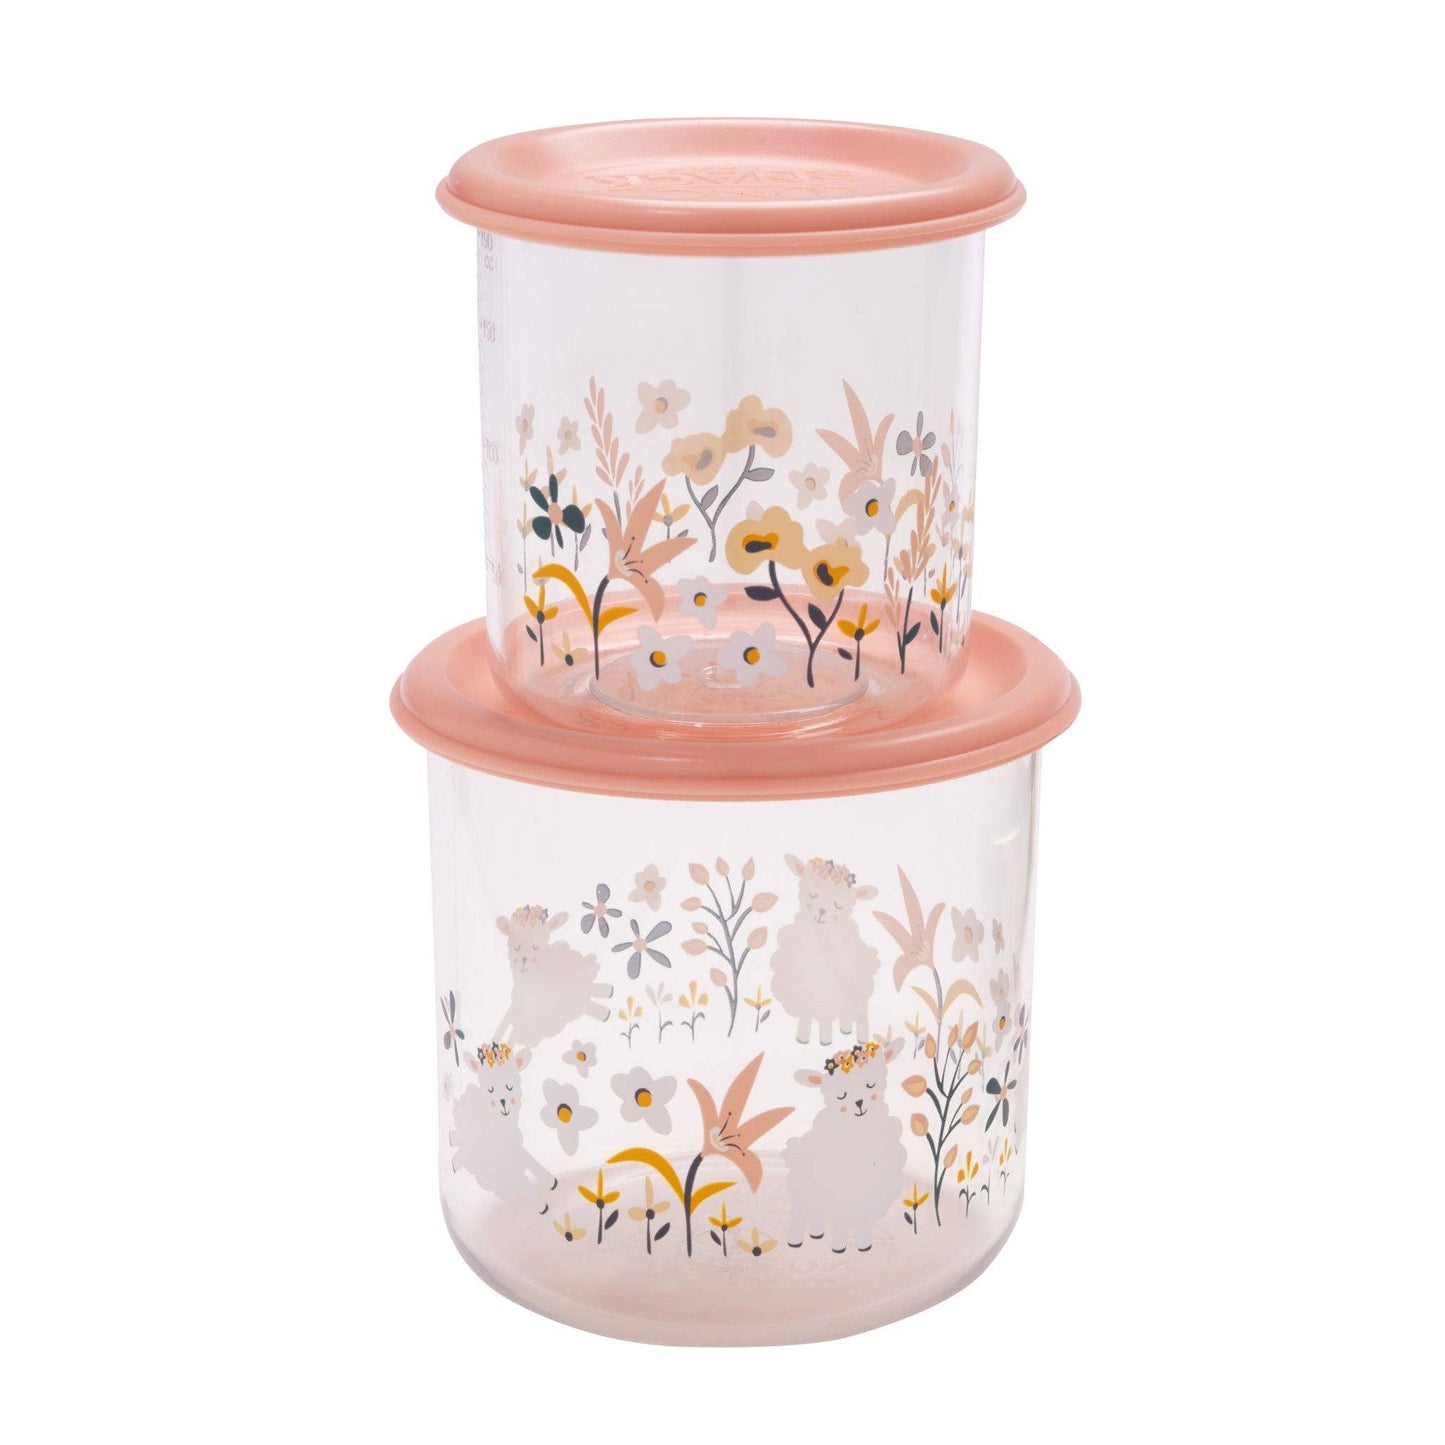 Sugarbooger by Ore’ Originals - Good Lunch Snack Containers | Lily the Lamb | Large